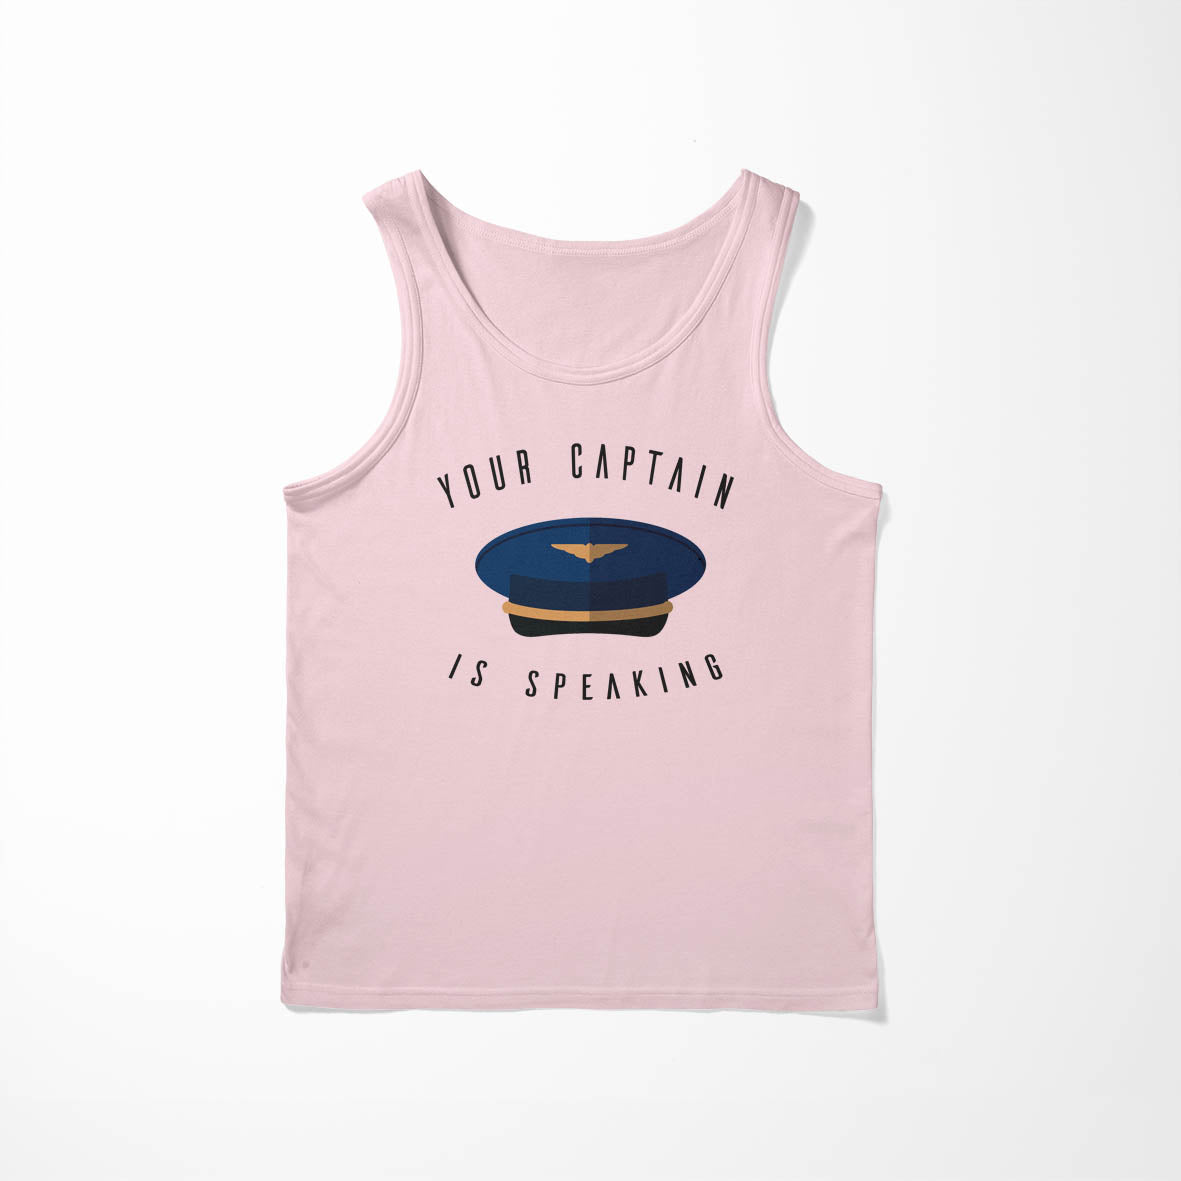 Your Captain Is Speaking Designed Tank Tops